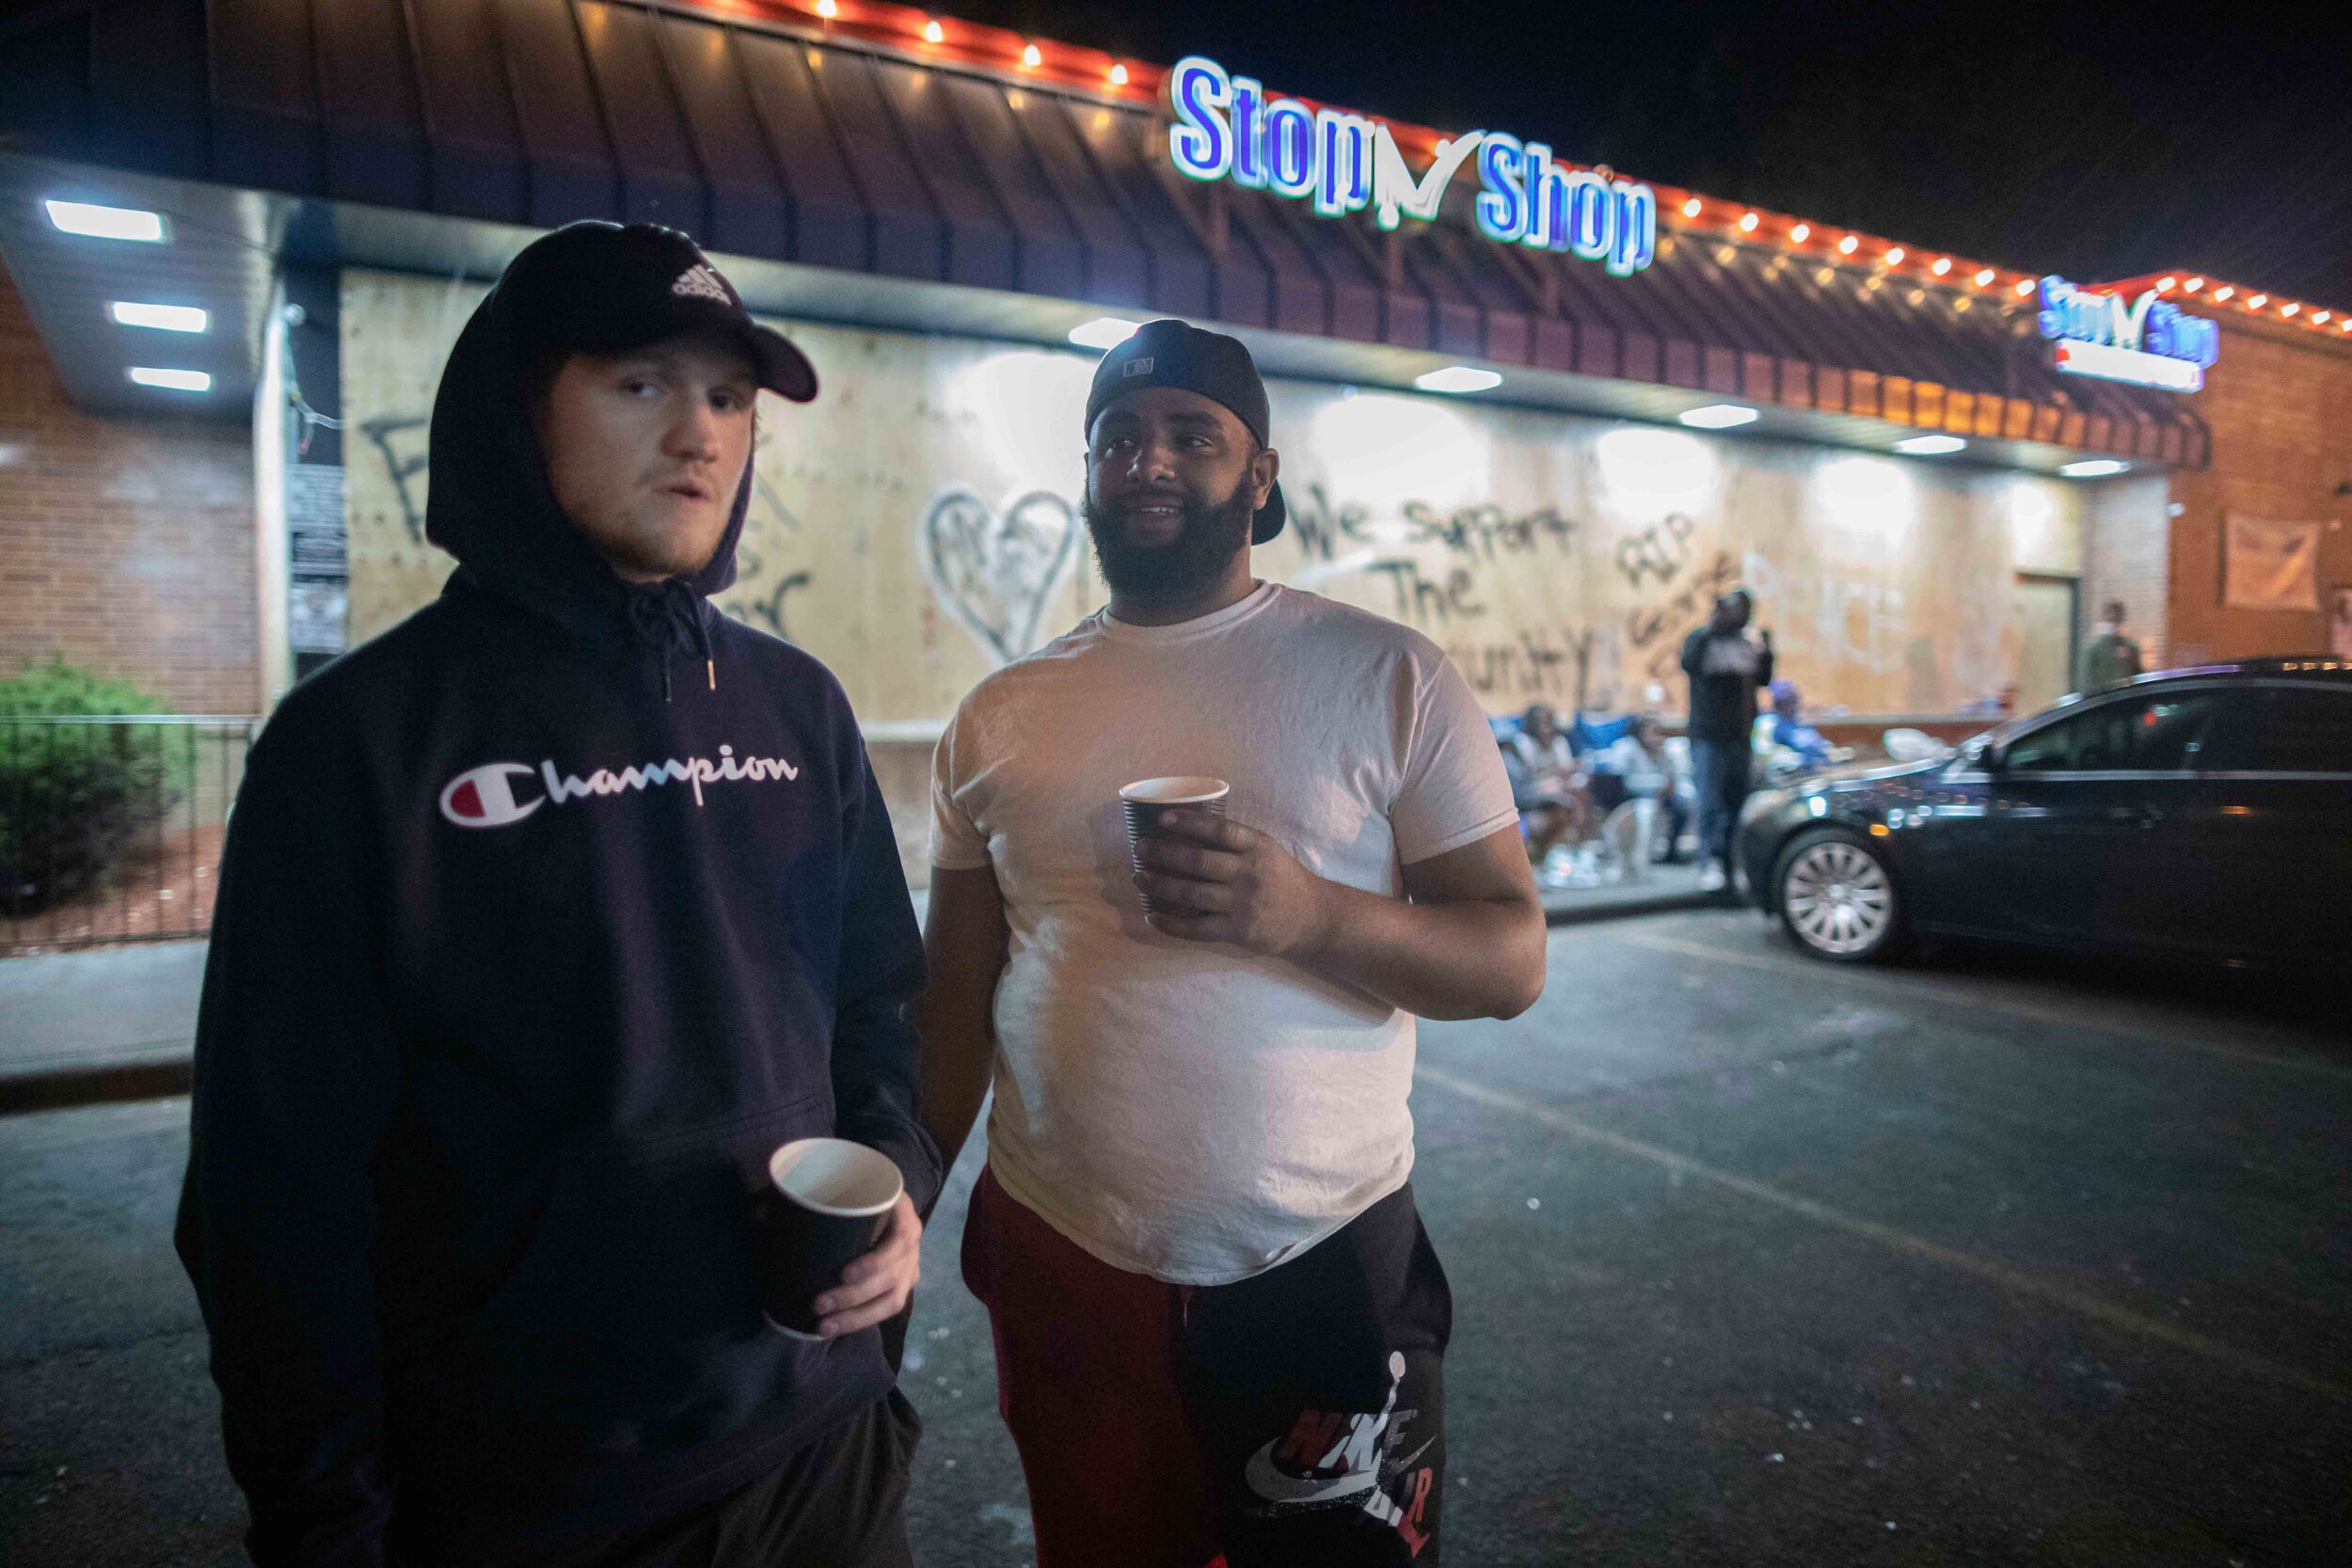  People stand guard over a gas station to prevent it from being further looted or burned down in riots that have swept through the Twin Cities over the police killing of George Floyd in Minneapolis, Minnesota on May 30, 2020. Chris Juhn/Zuma. 